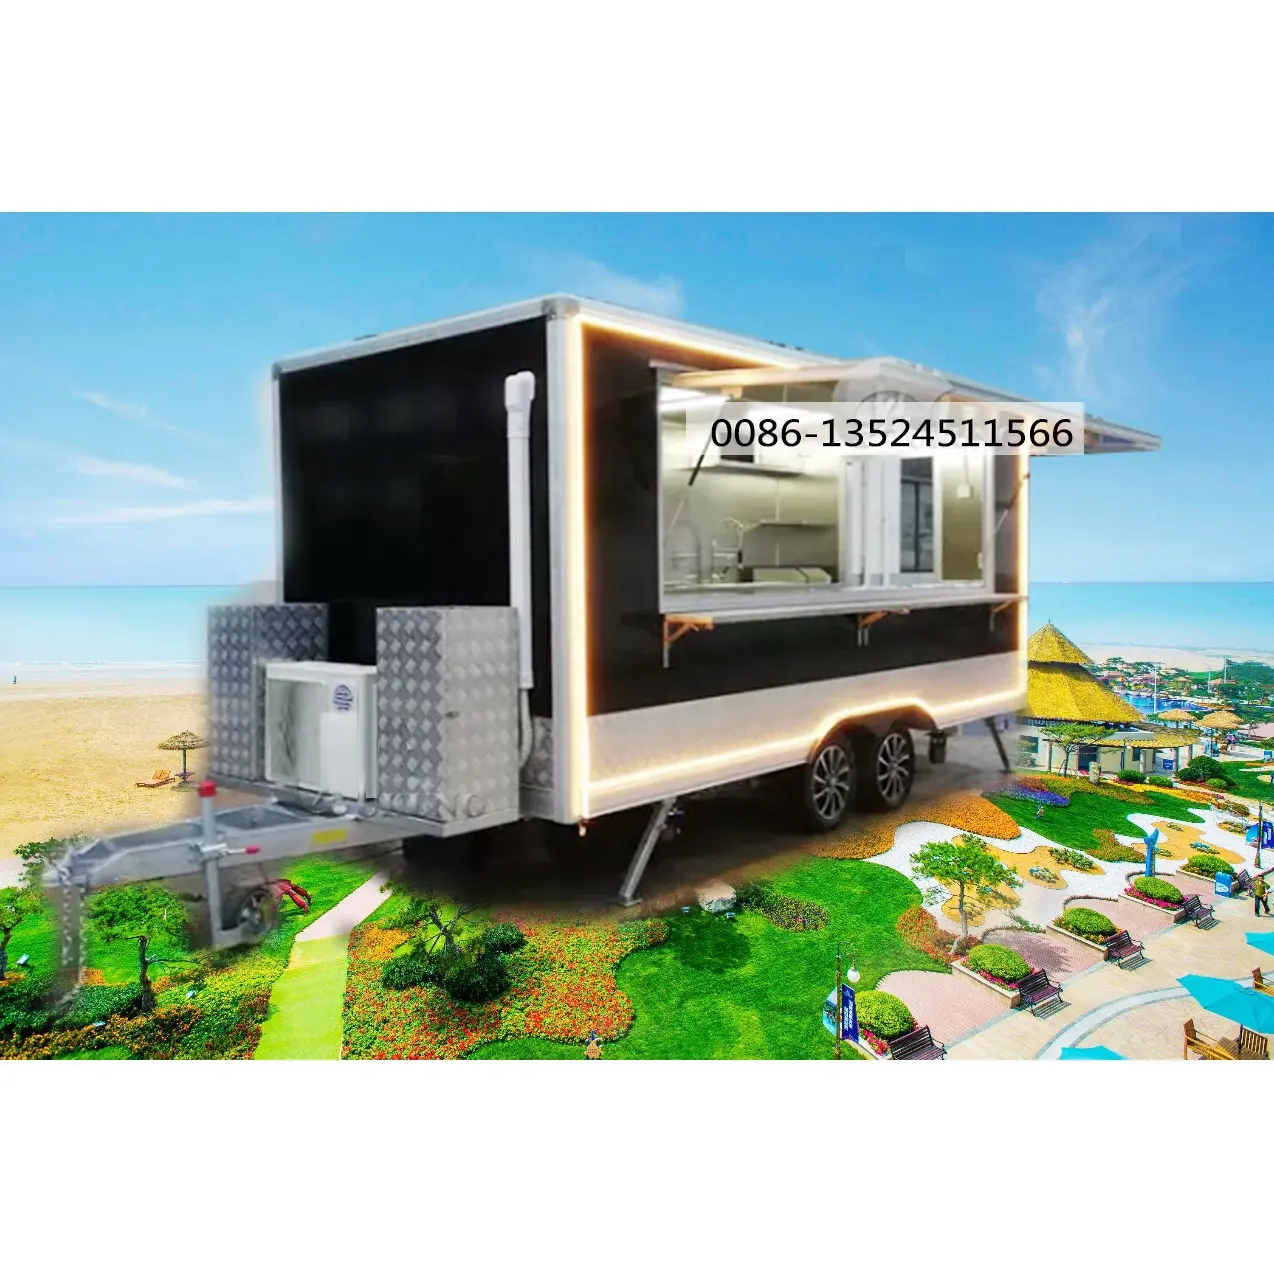 mobile food truck trailer for sale fryer chicken fast food cart best selling electric used camion de comida vagon